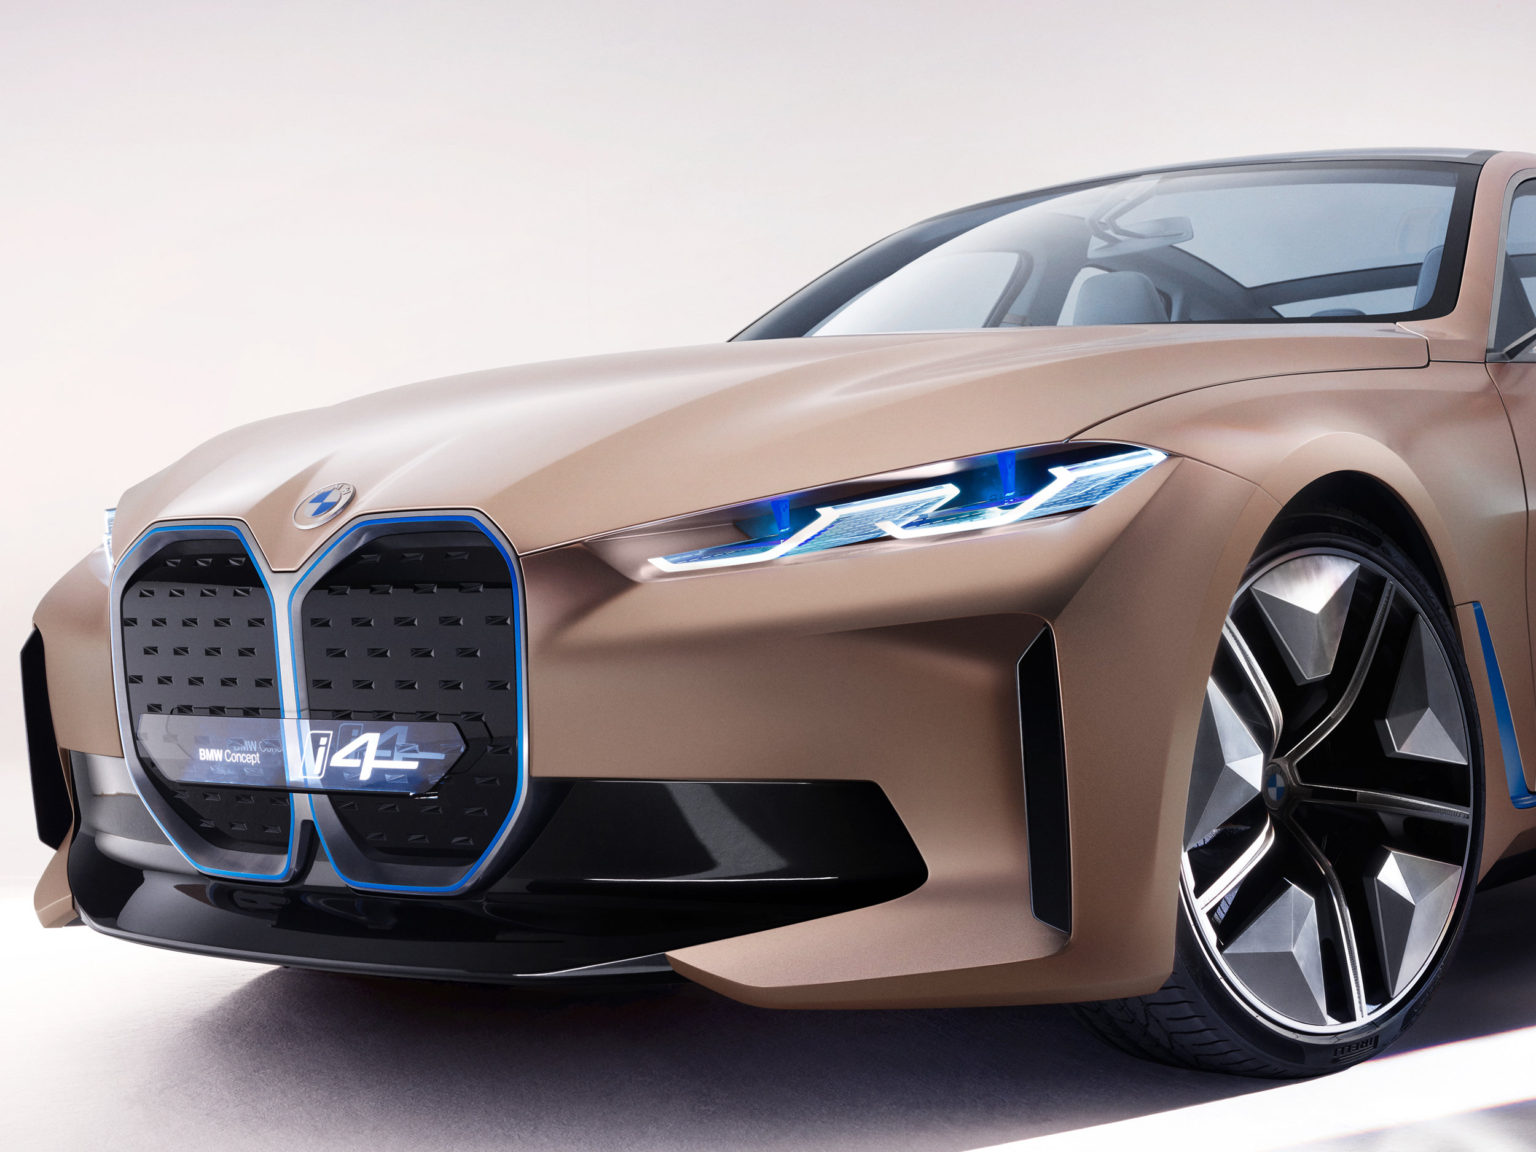 The BMW Concept i4will evolve to become the new i4 electric sedan.